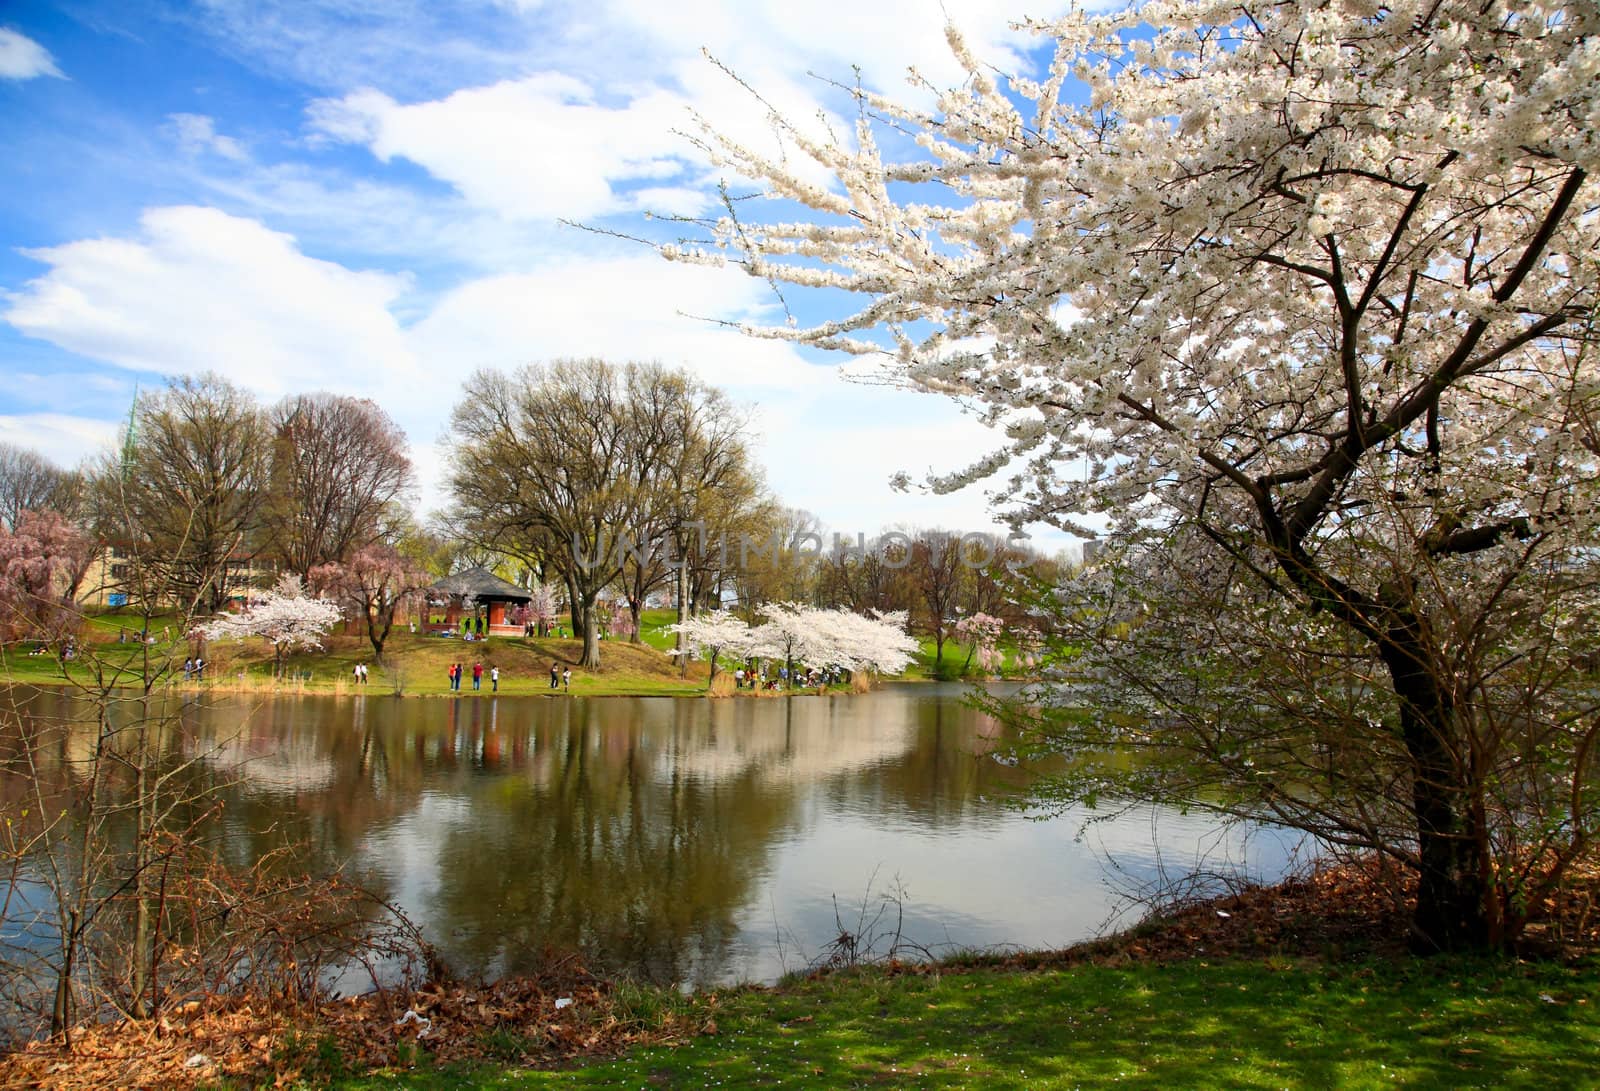 The Cherry Blossom Festival in New Jersey by gary718